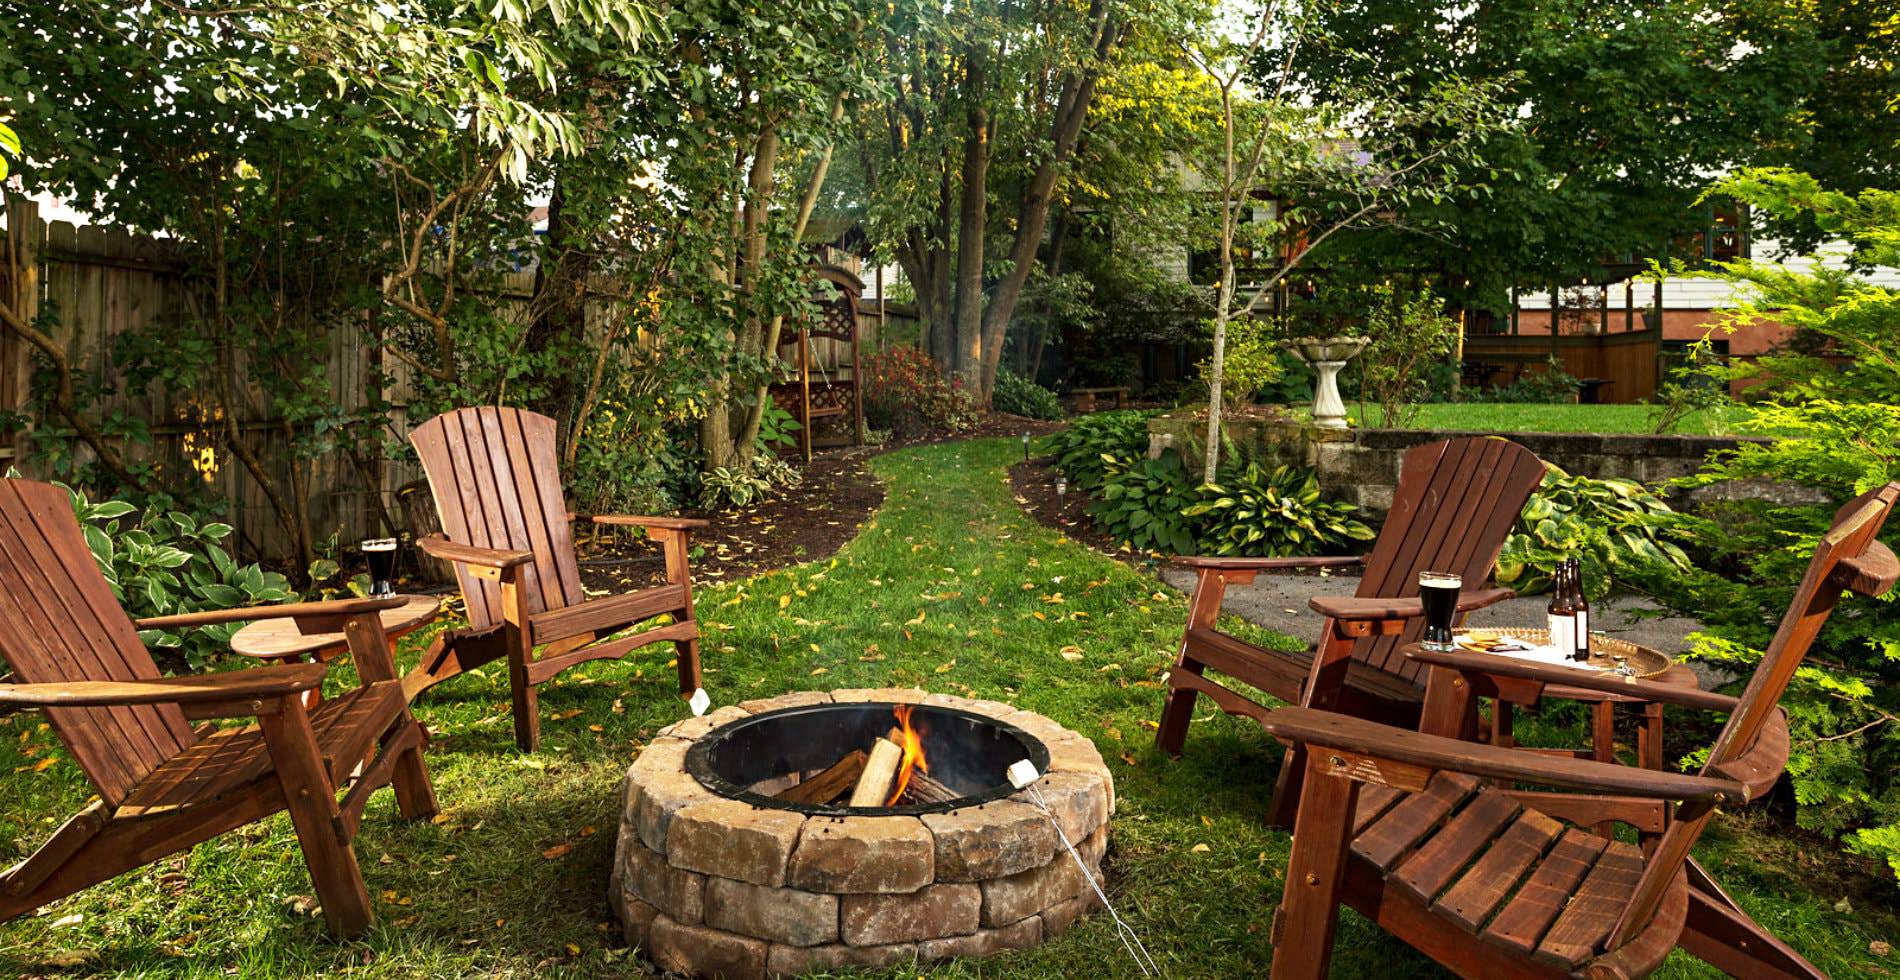 Outside view of a grassy backyard, several lawn chairs around a stone fireplace, a green path leading away from scene